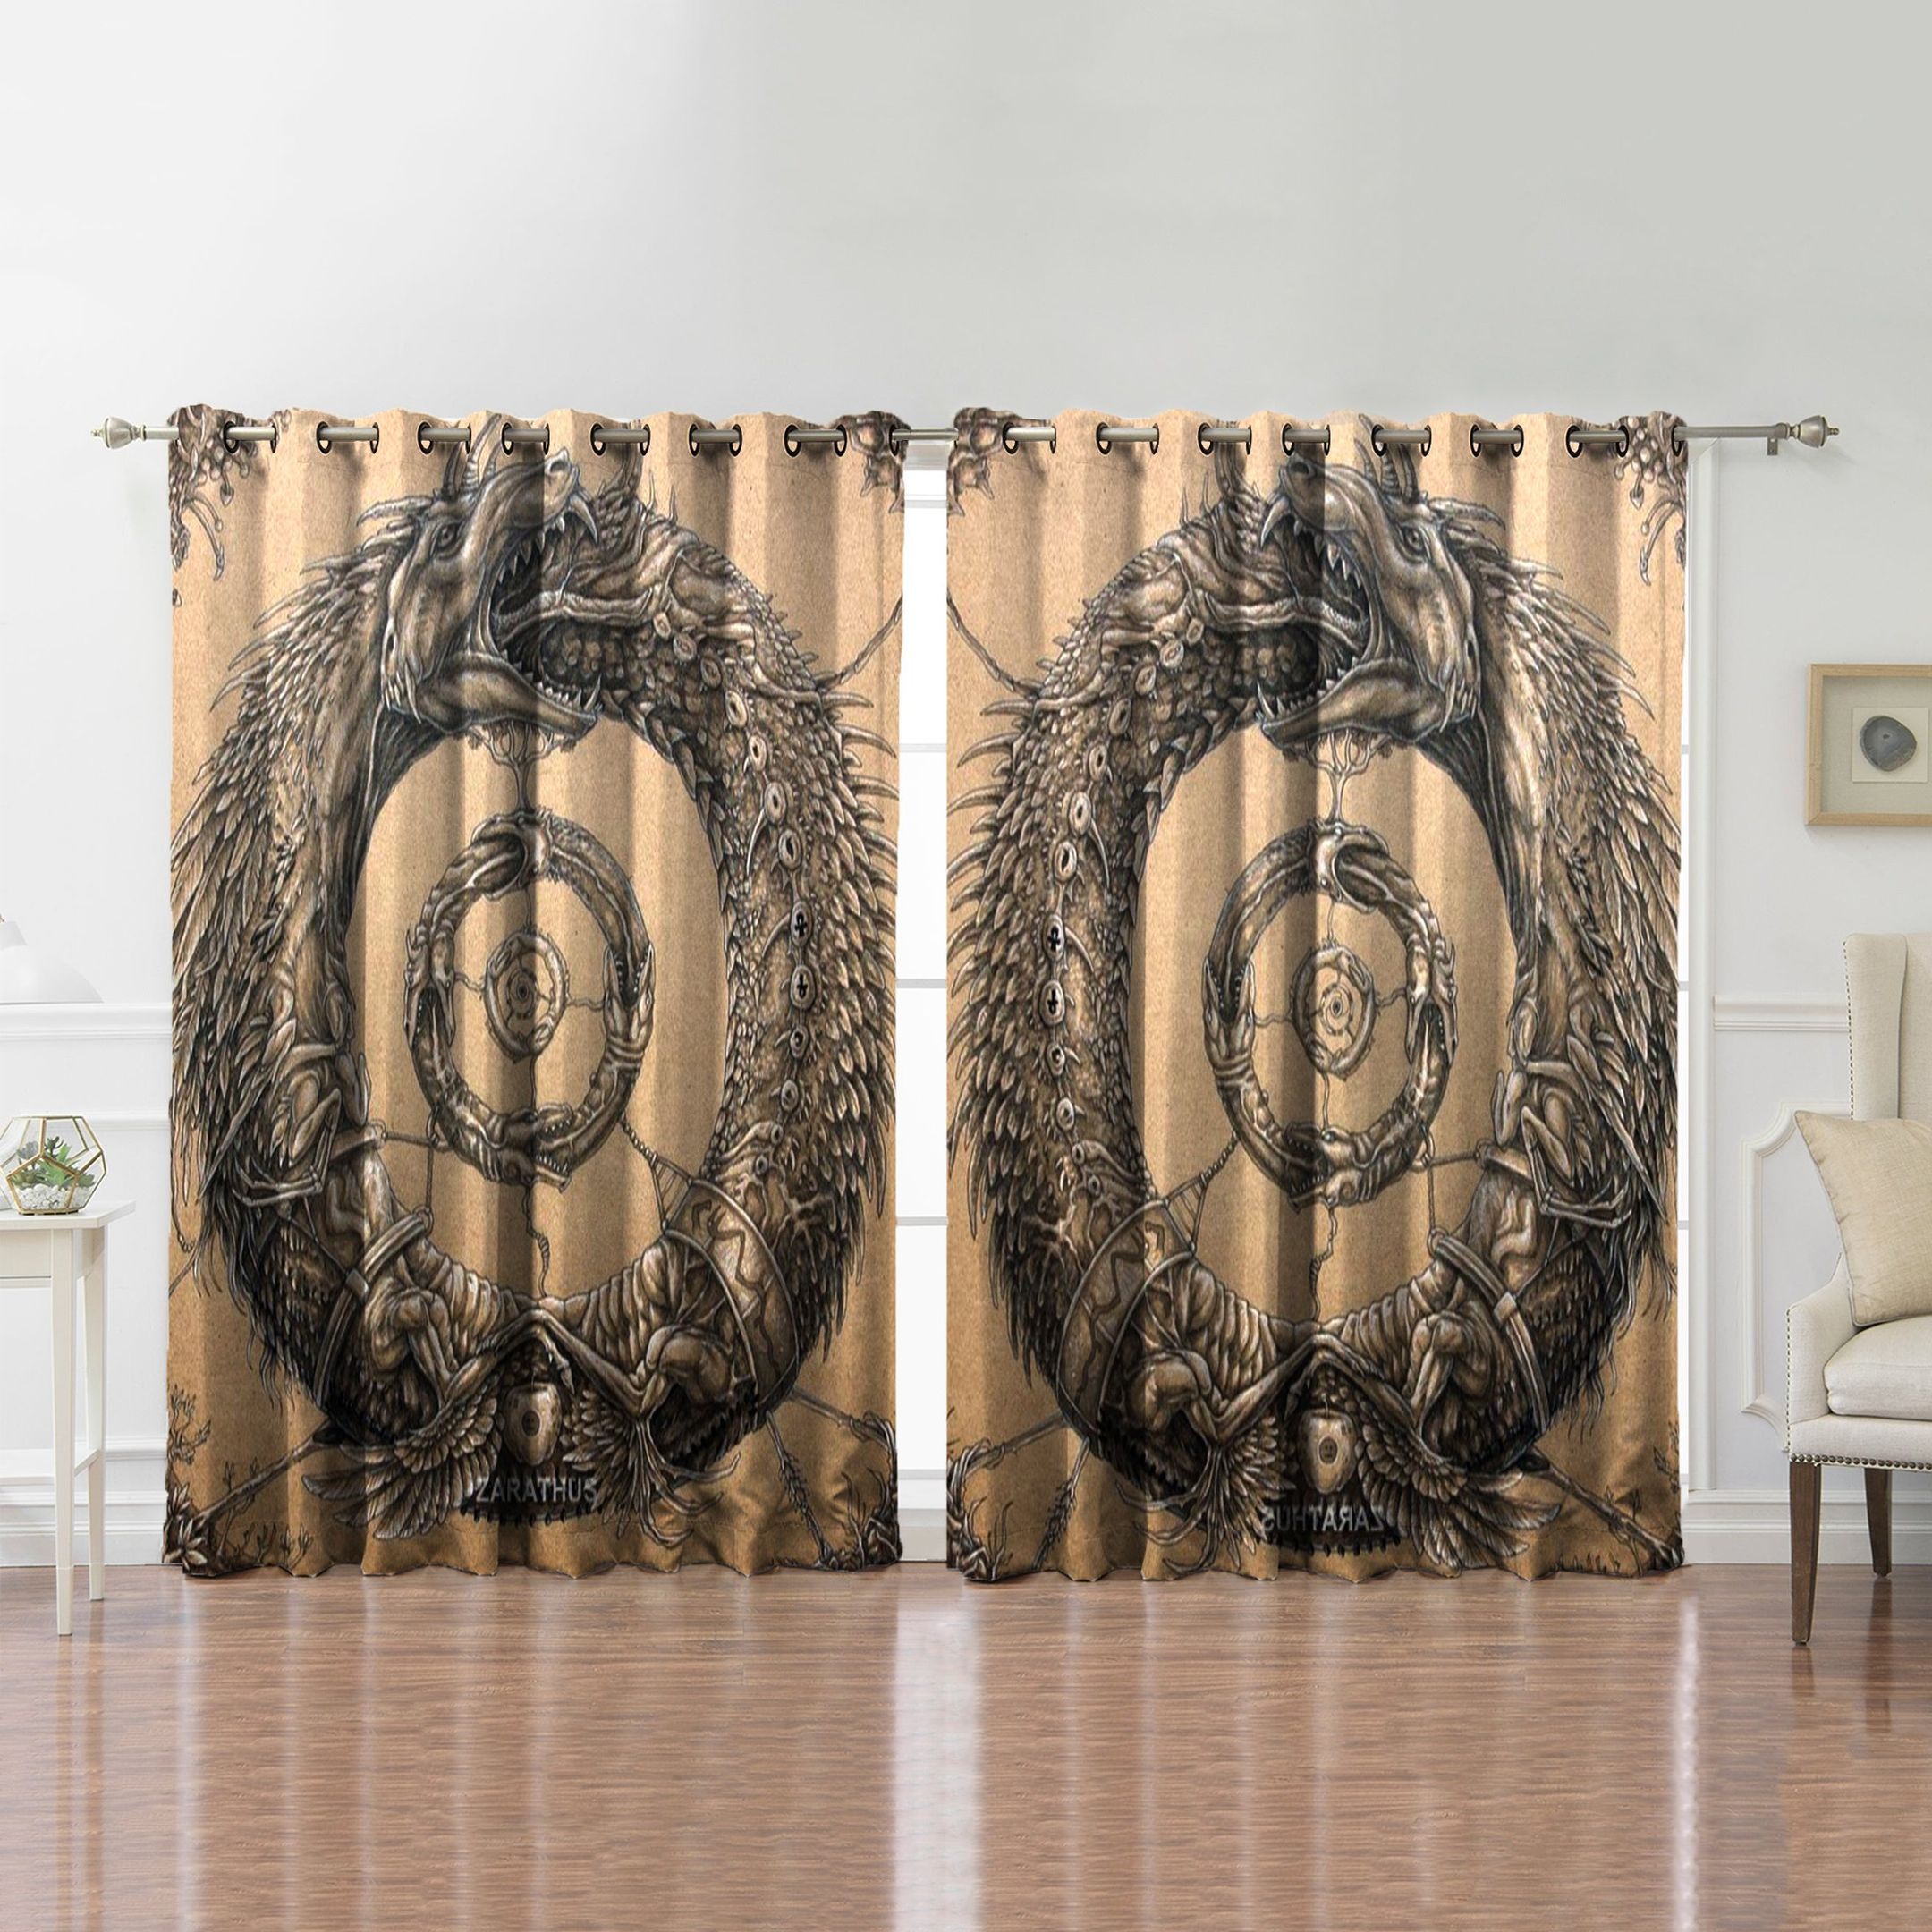 Awesome all Print Viking Skull Printed Window Curtain Home Decor